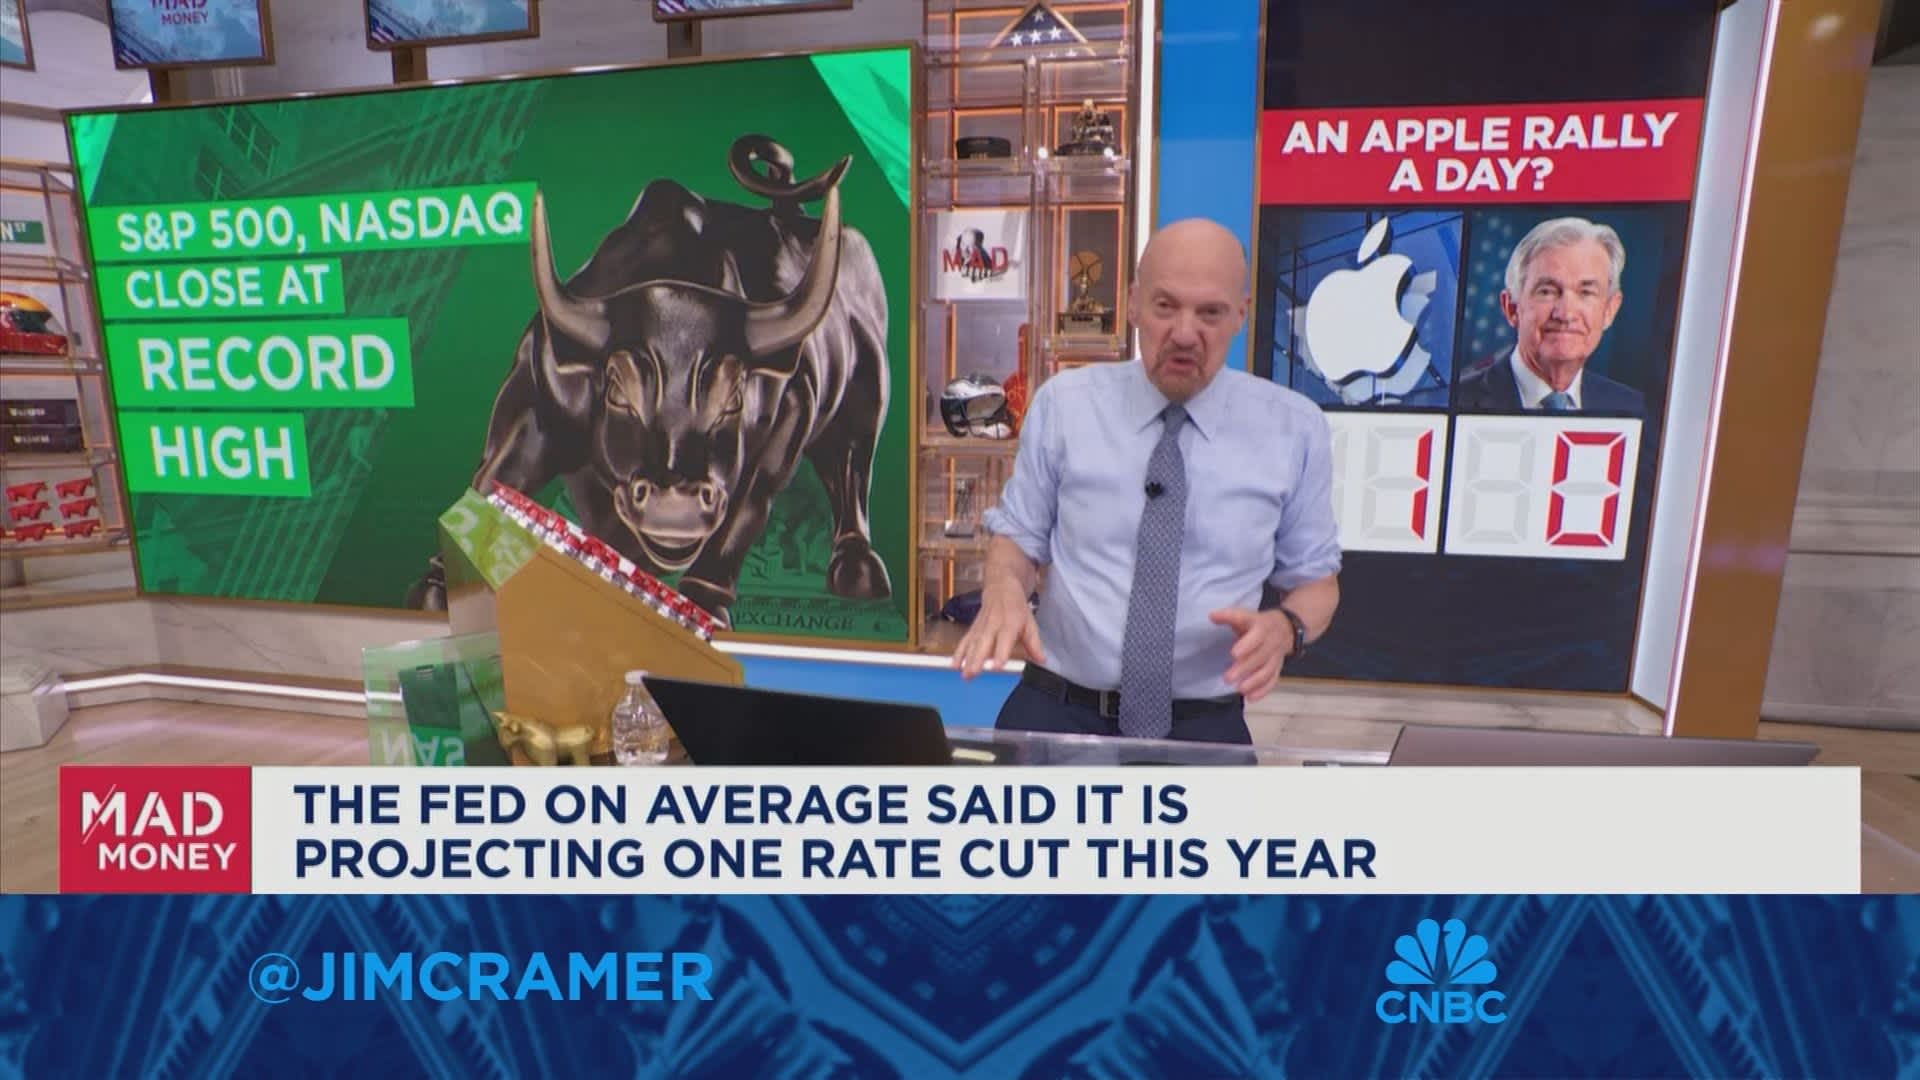 More readings like the May CPI will give the Fed what it needs to cut rates, says Jim Cramer